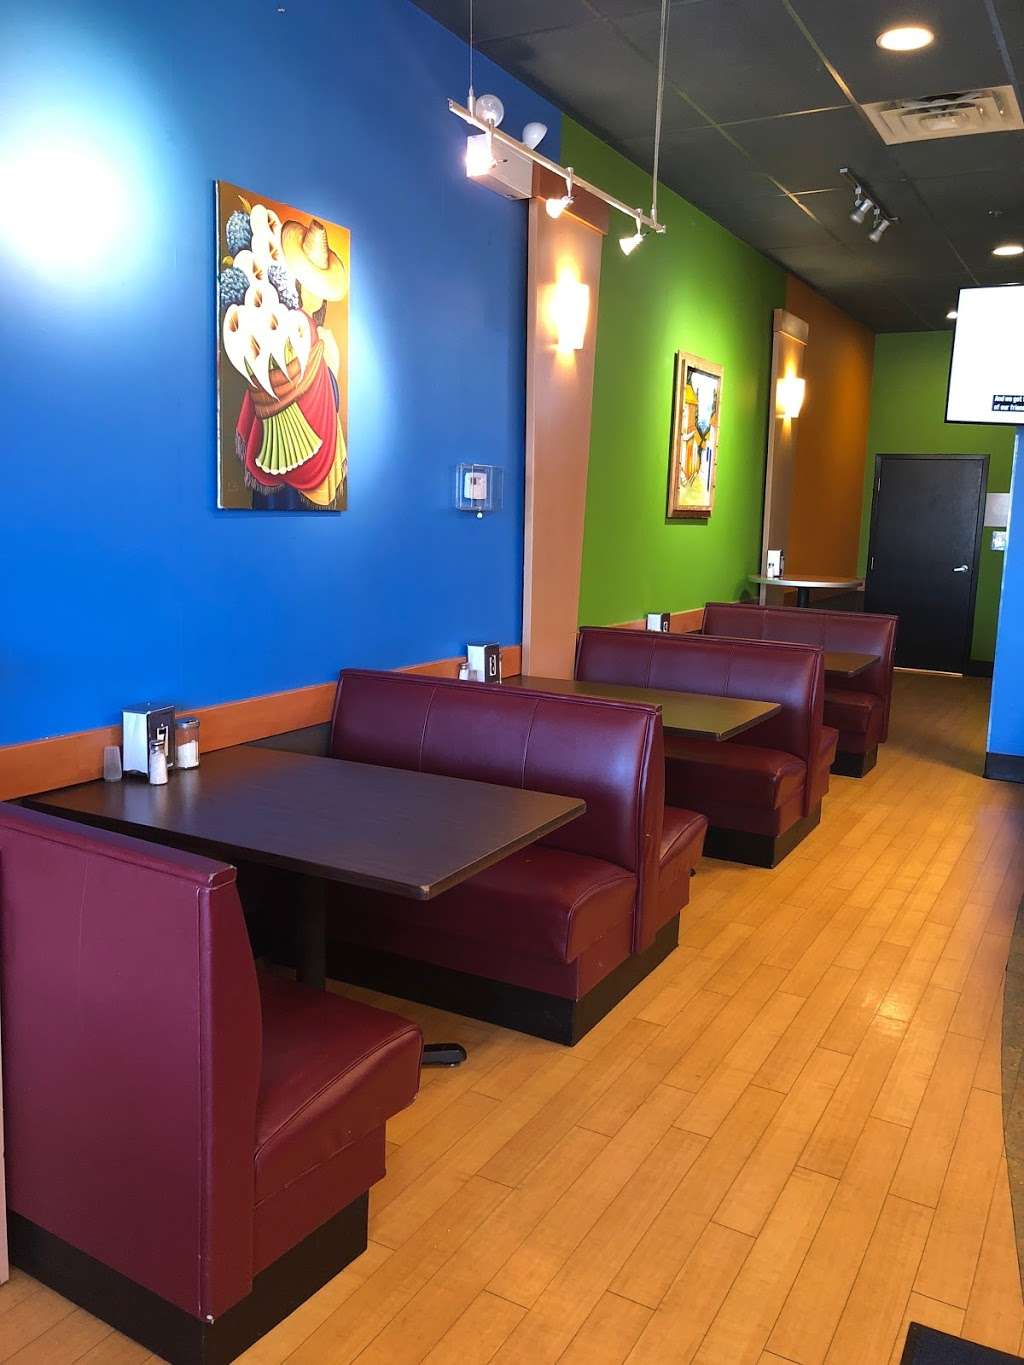 Mr. Pepper | 11247 W 143rd St, Orland Park, IL 60467, USA | Phone: (708) 226-5666